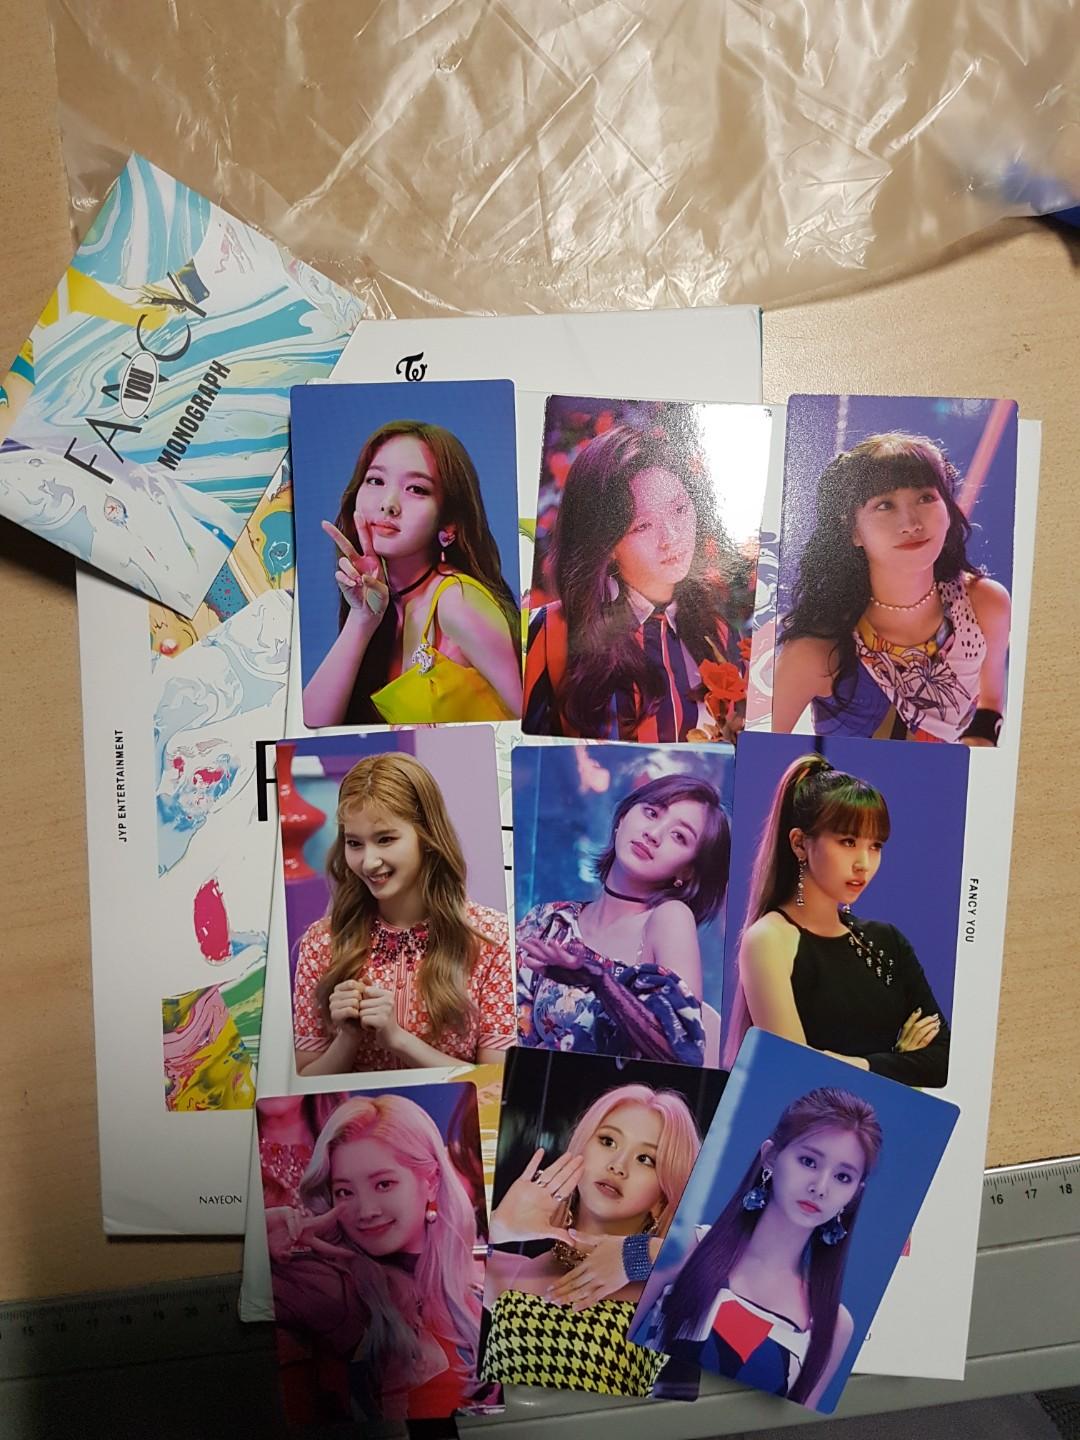 Wts Twice Fancy Monograph Hobbies Toys Memorabilia Collectibles K Wave On Carousell